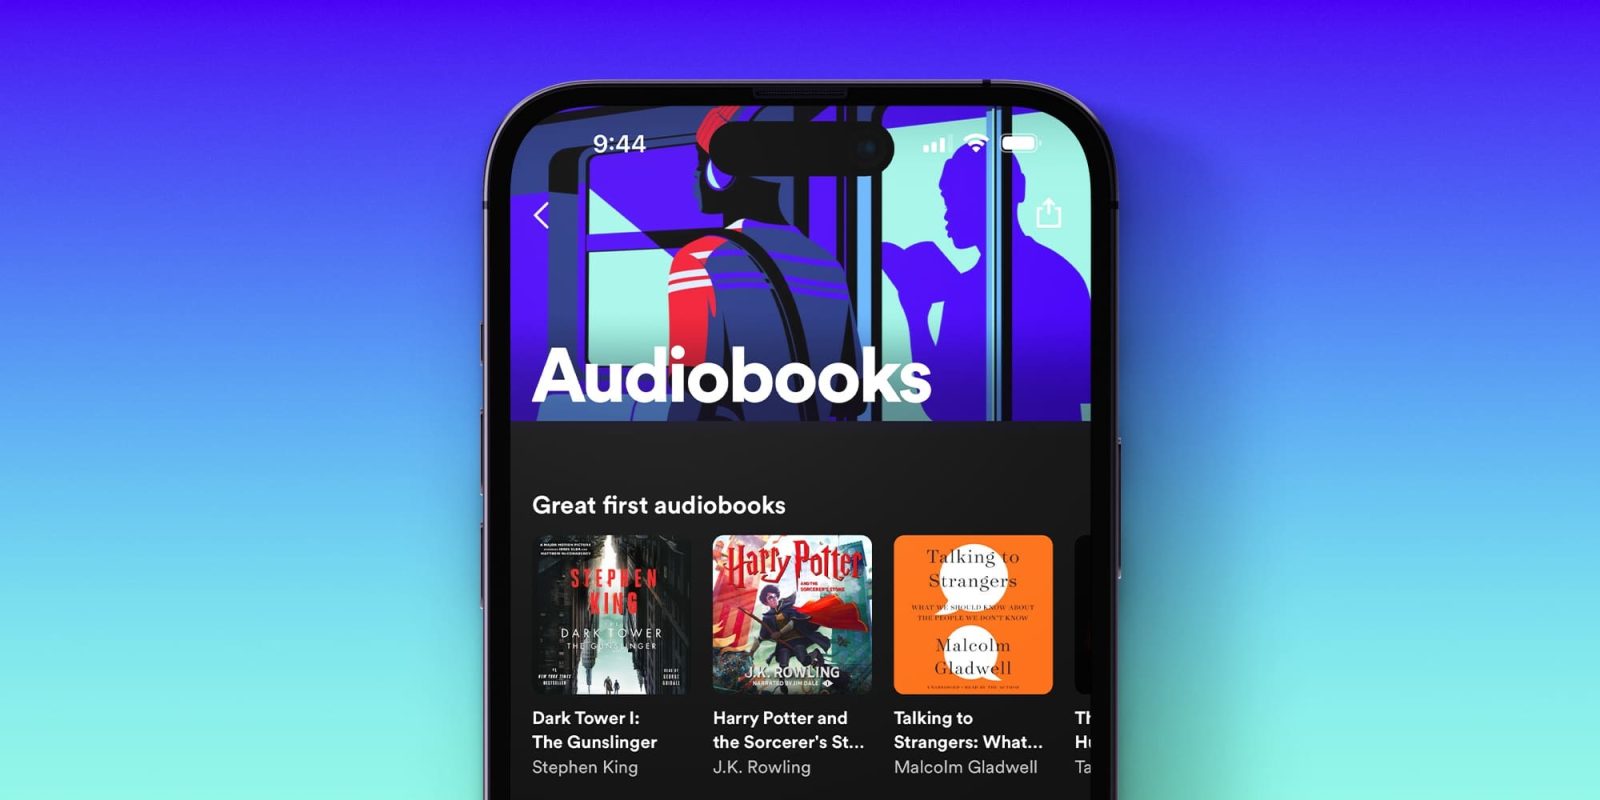 Spotify audiobooks launch with 300k titles, but no discounts